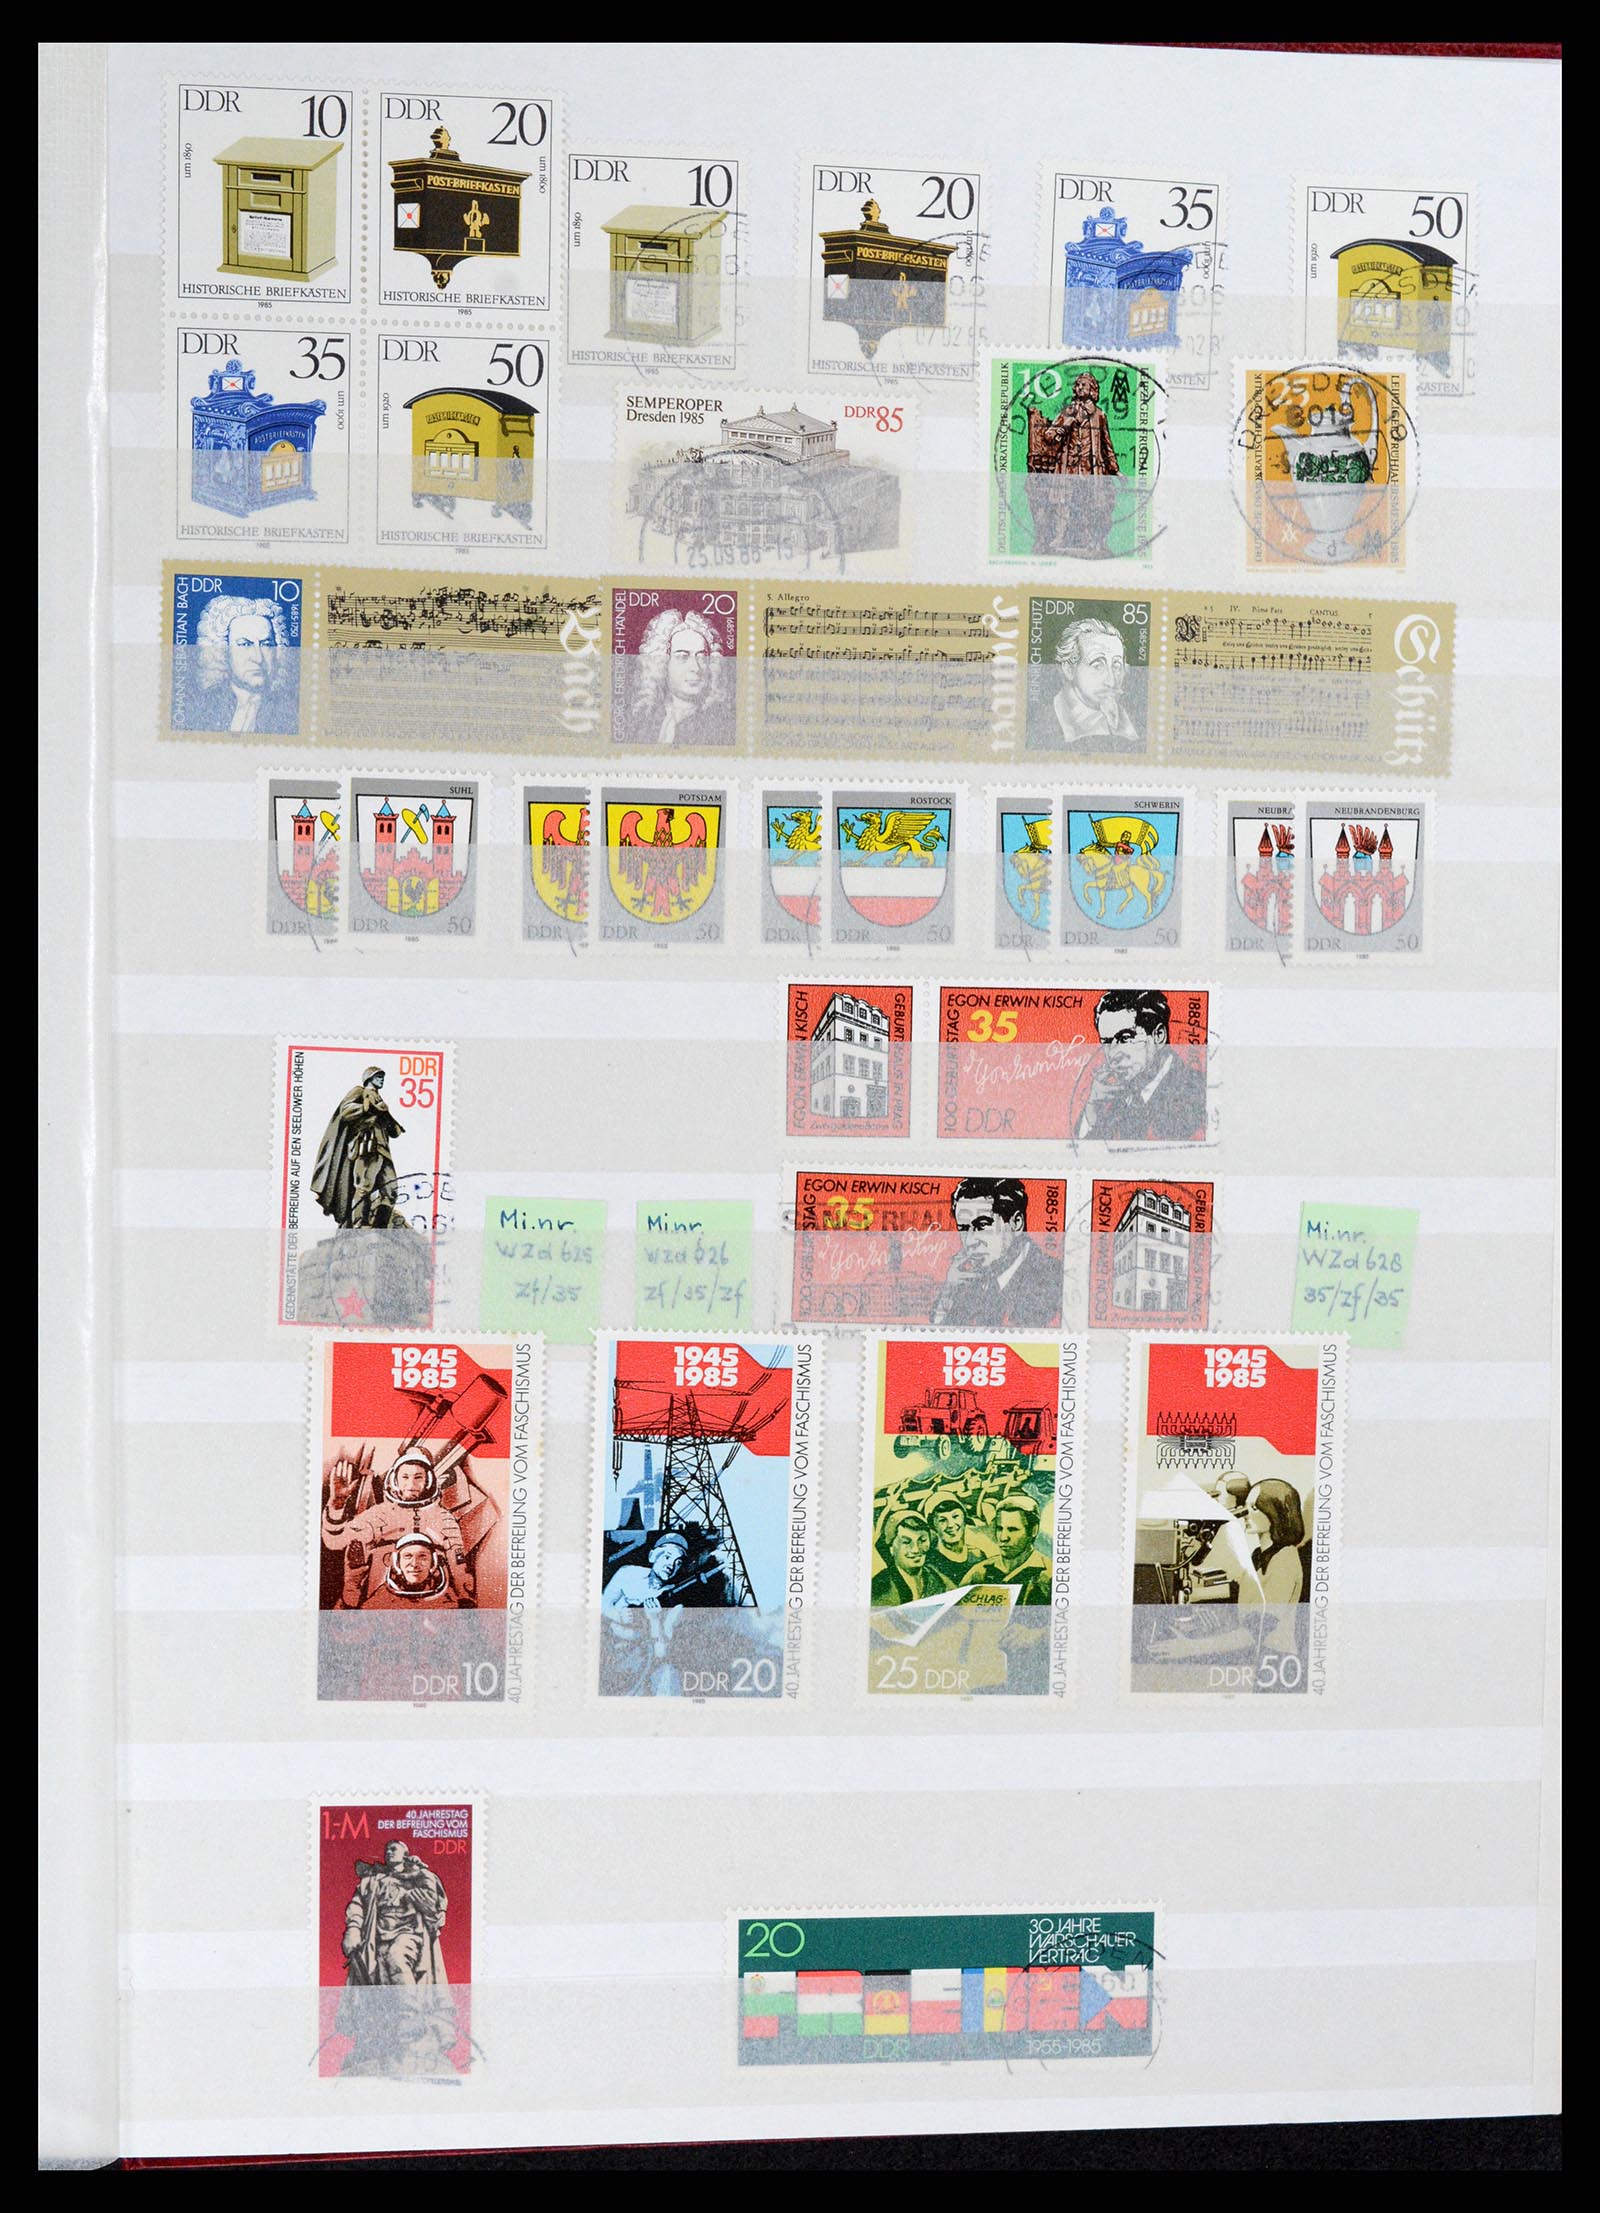 37501 098 - Stamp collection 37501 GDR 1949-1990.